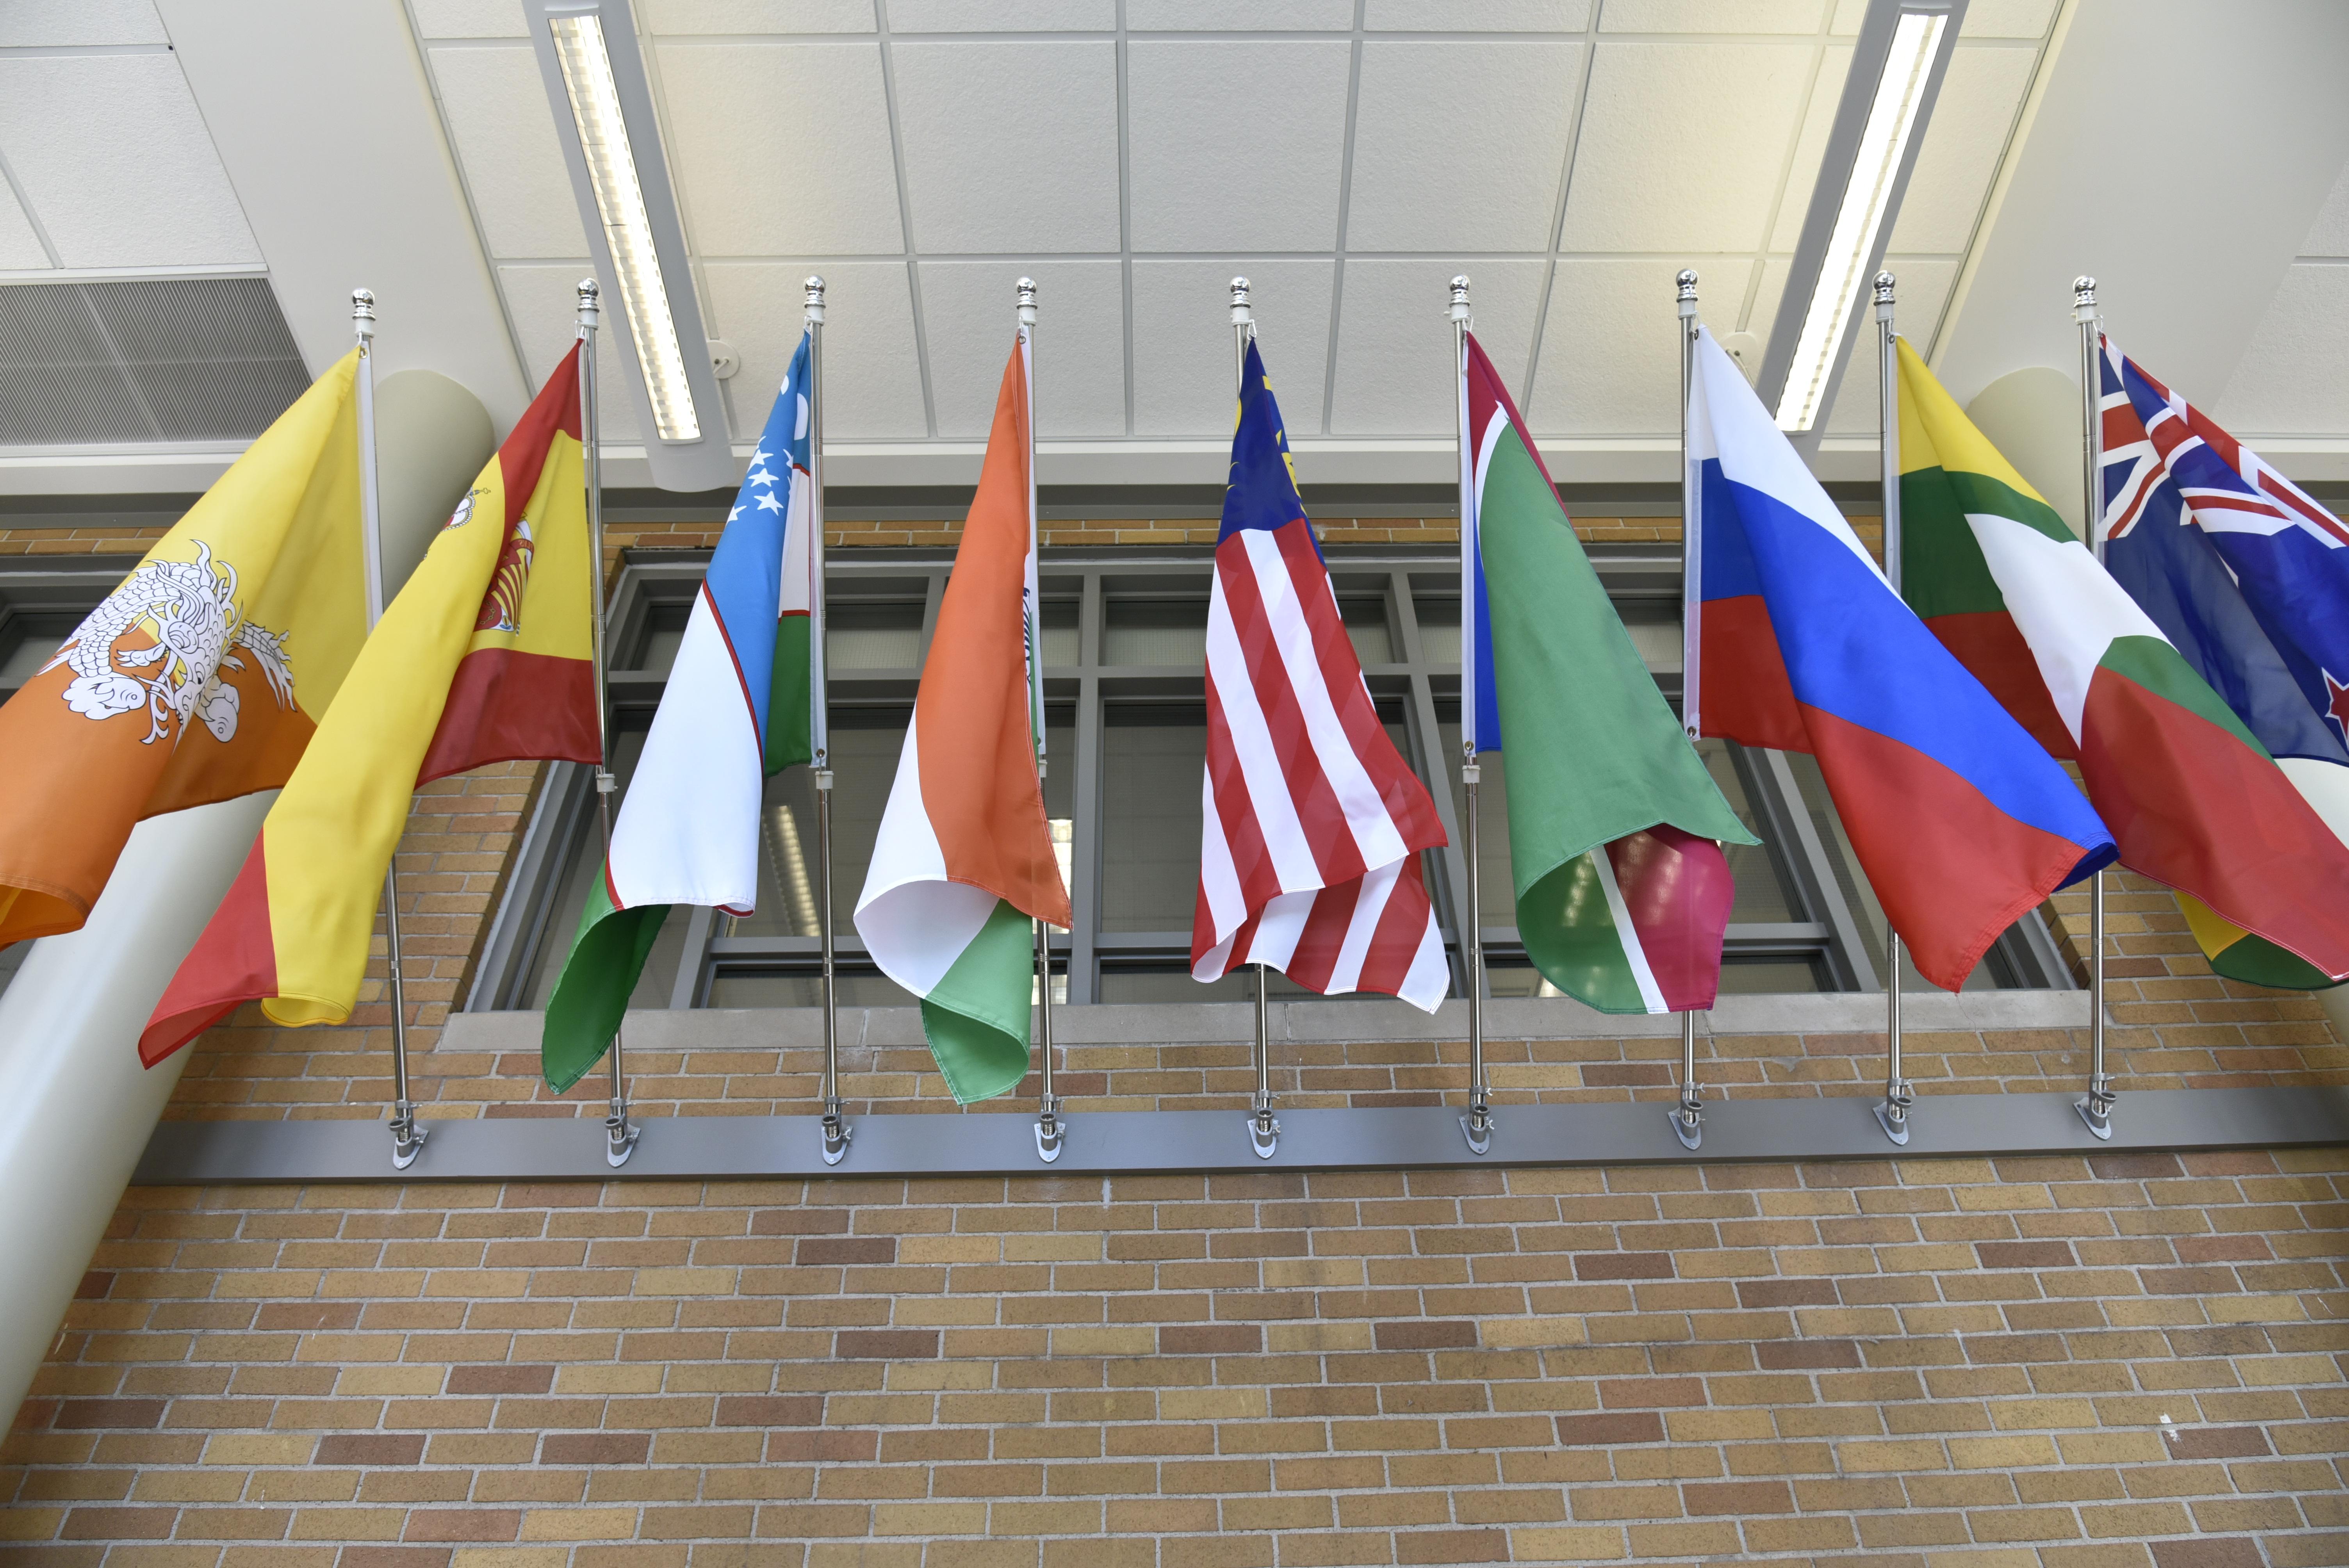 Some of the flags in the Flags of Nations display in the Marano Campus Center at SUNY Oswego